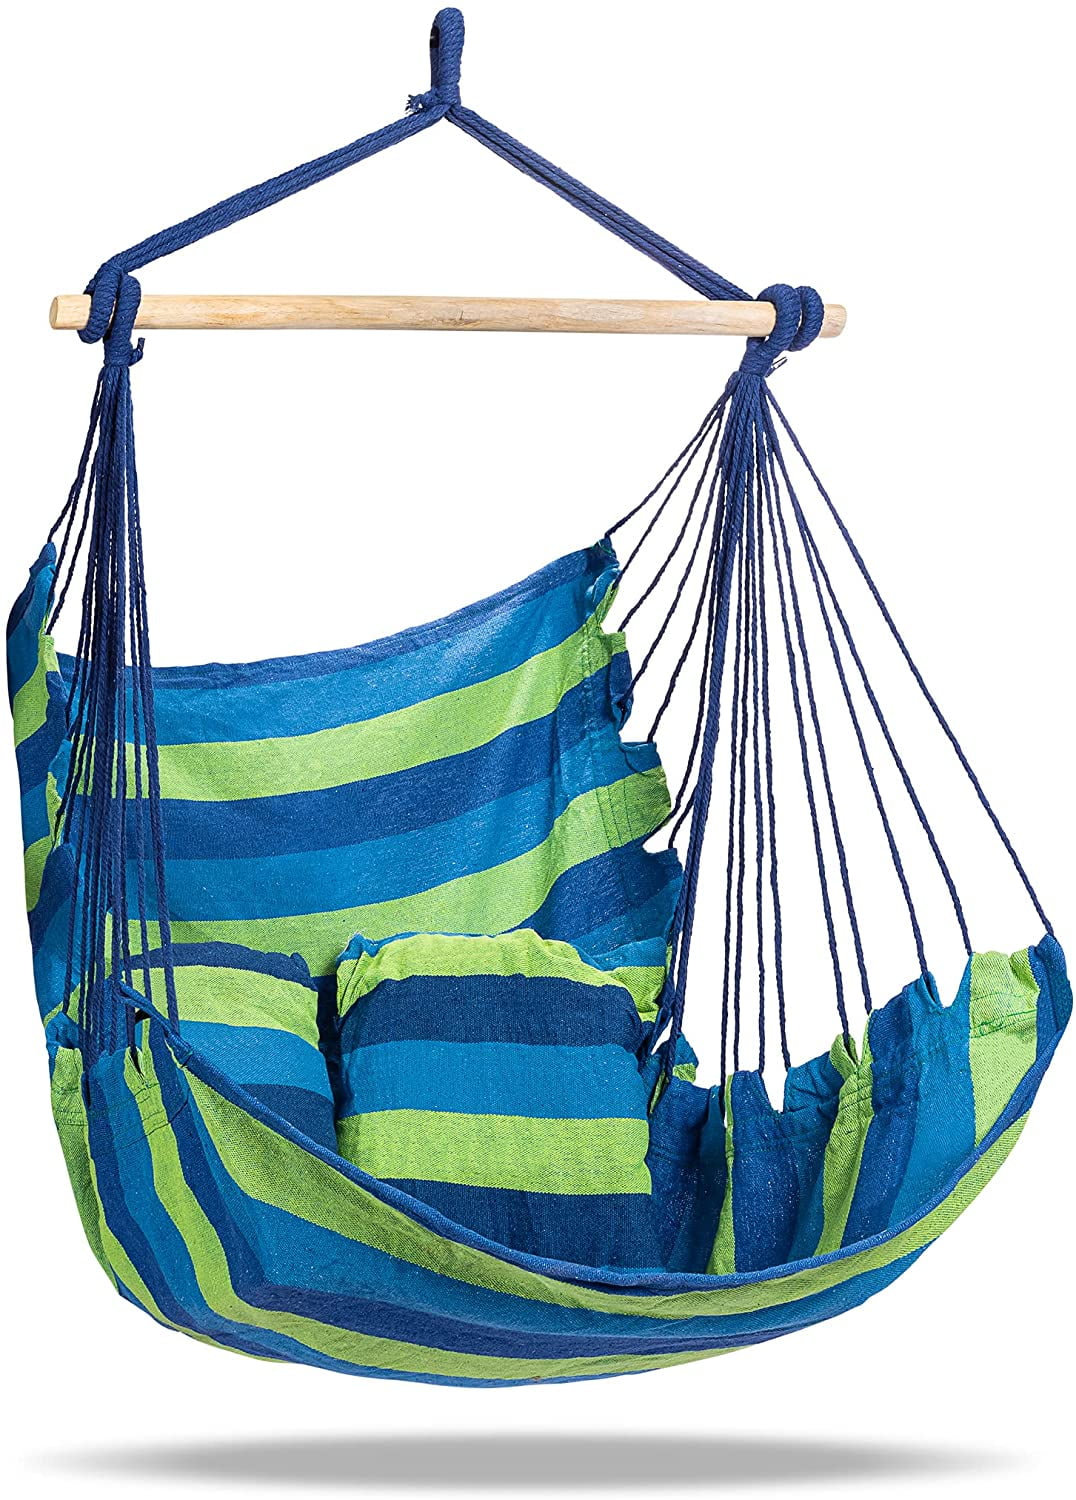 Polycotton Indoor or Outdoor Hammock,Wooden Support Bar & Secure Hanging Rope 